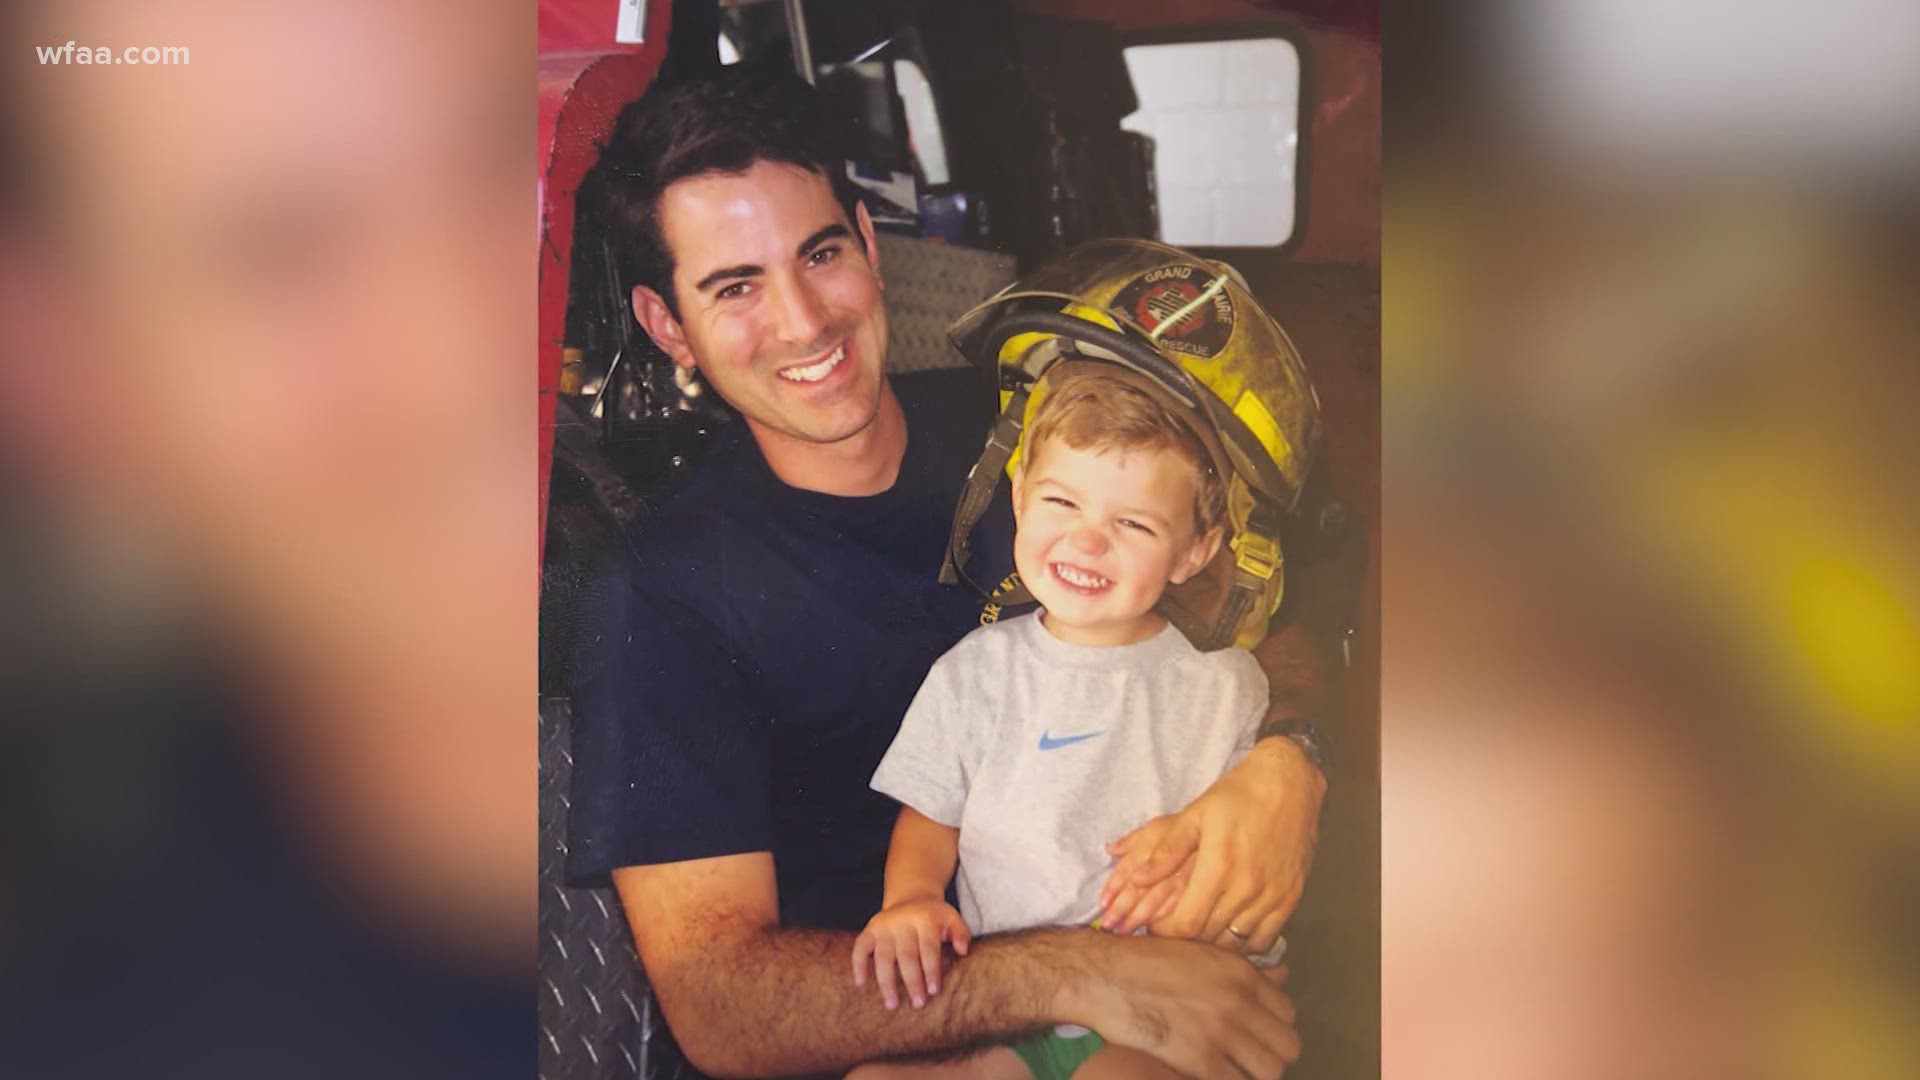 His father is a 23-year veteran and is now a fire investigator.